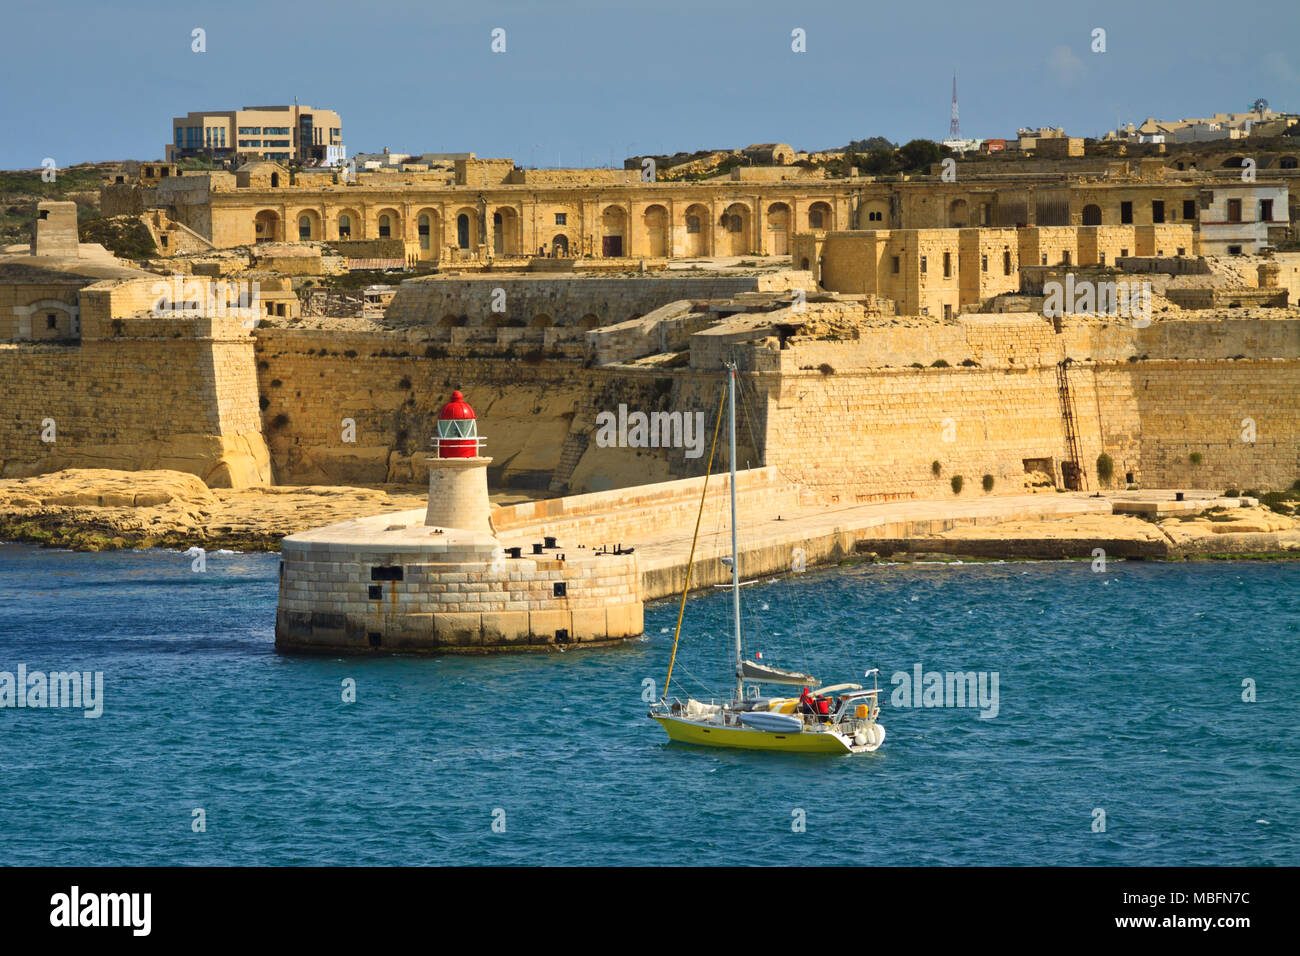 The Grand Harbour also known as the Port of Valletta, is a natural harbour on the island of Malta. Stock Photo